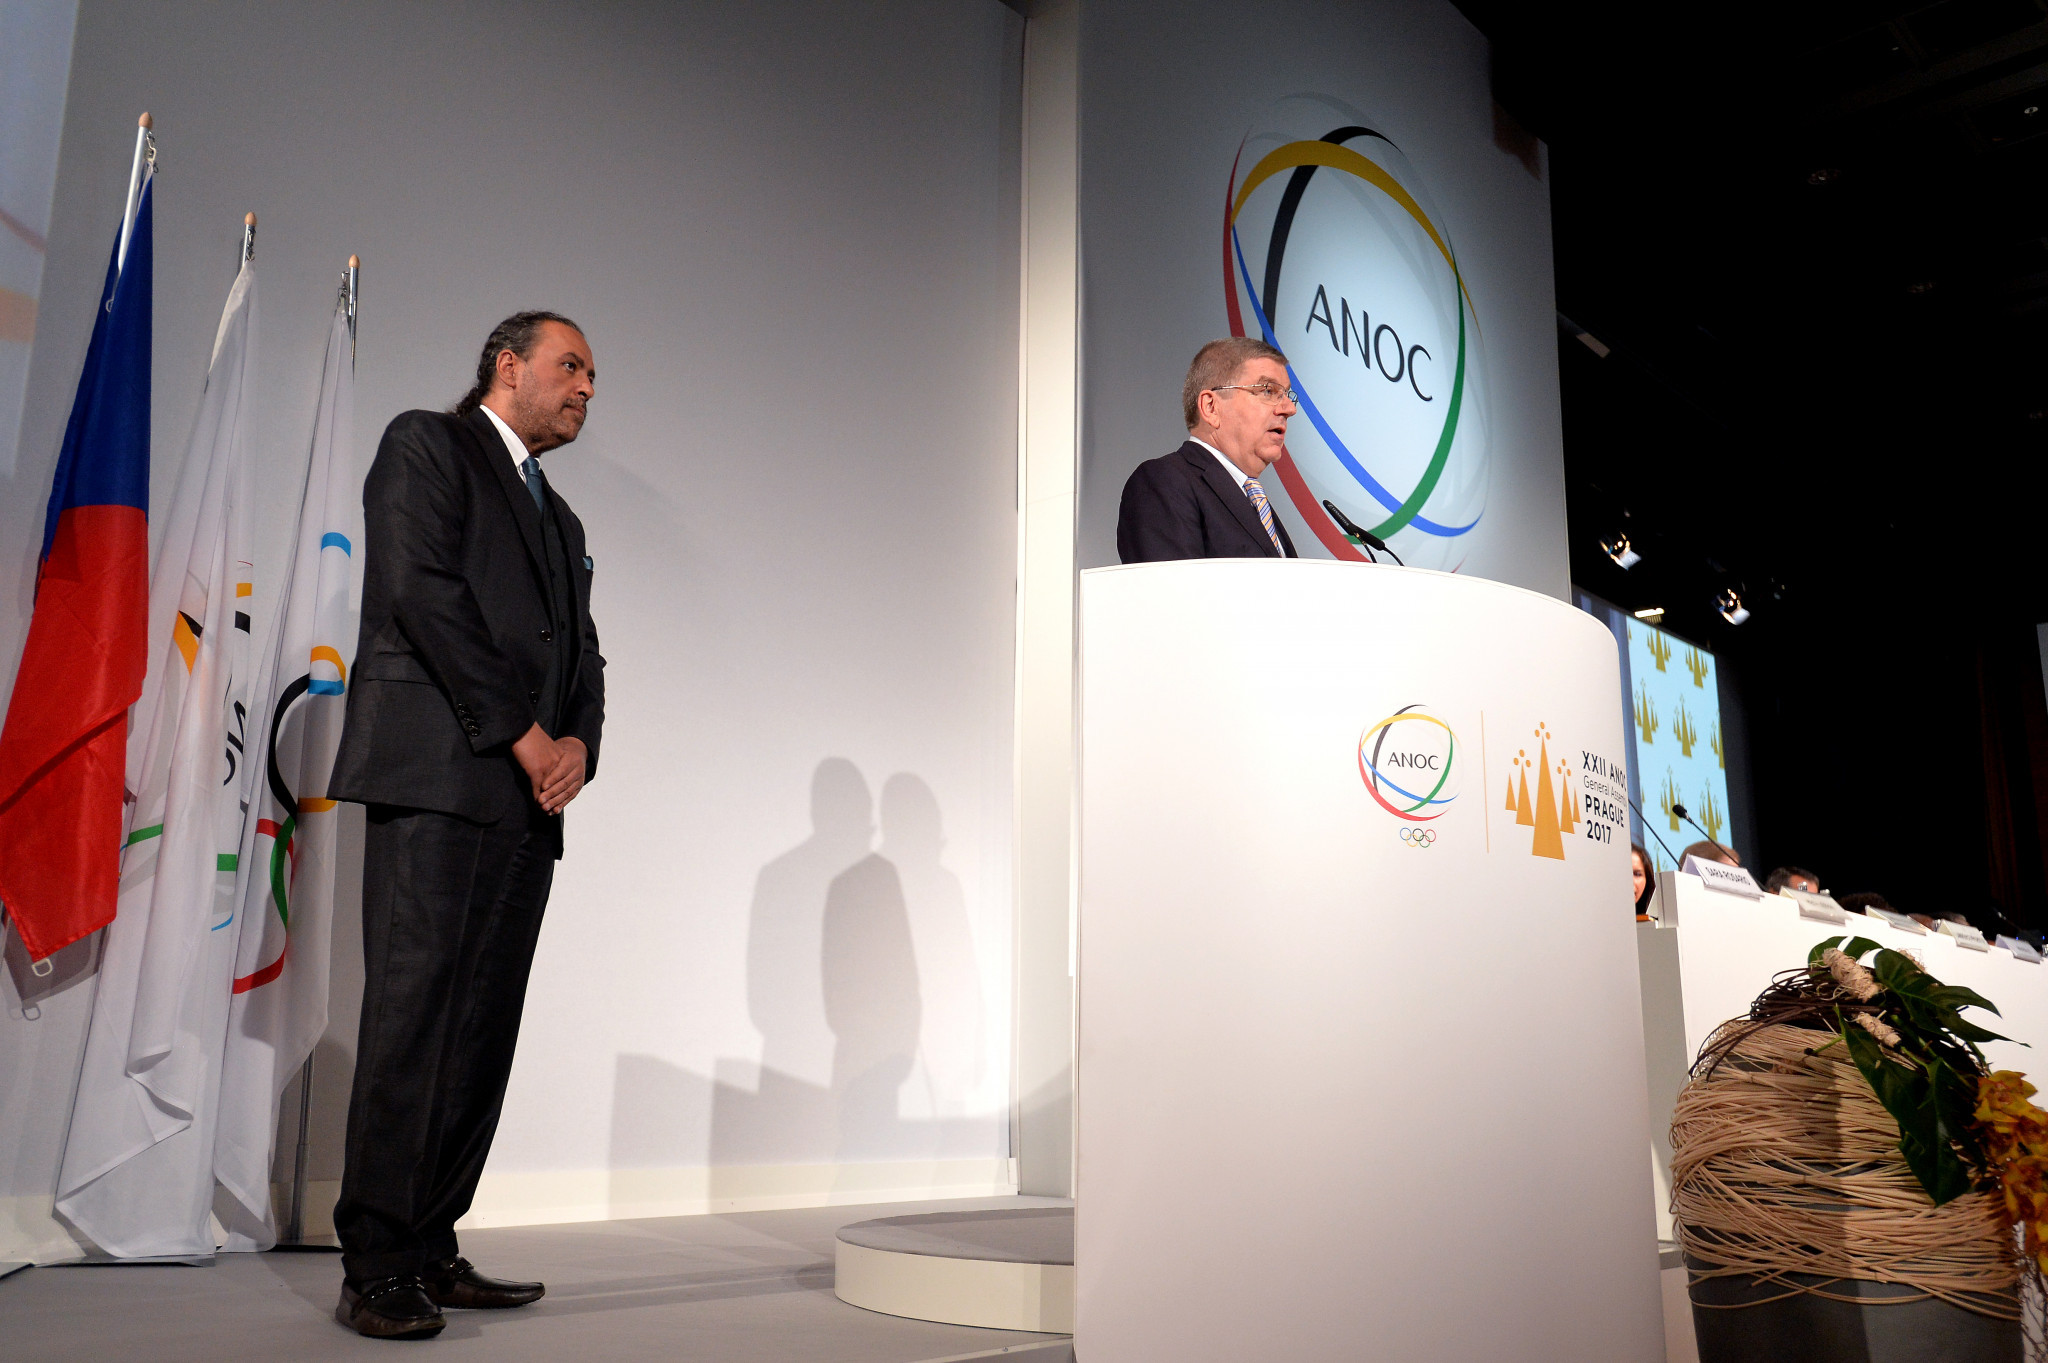 Sheikh Ahmad al-Fahad al-Sabah, left, was an important member of the campaign team that helped Thomas Bach, right, get elected as IOC President in 2013 ©Getty Images 